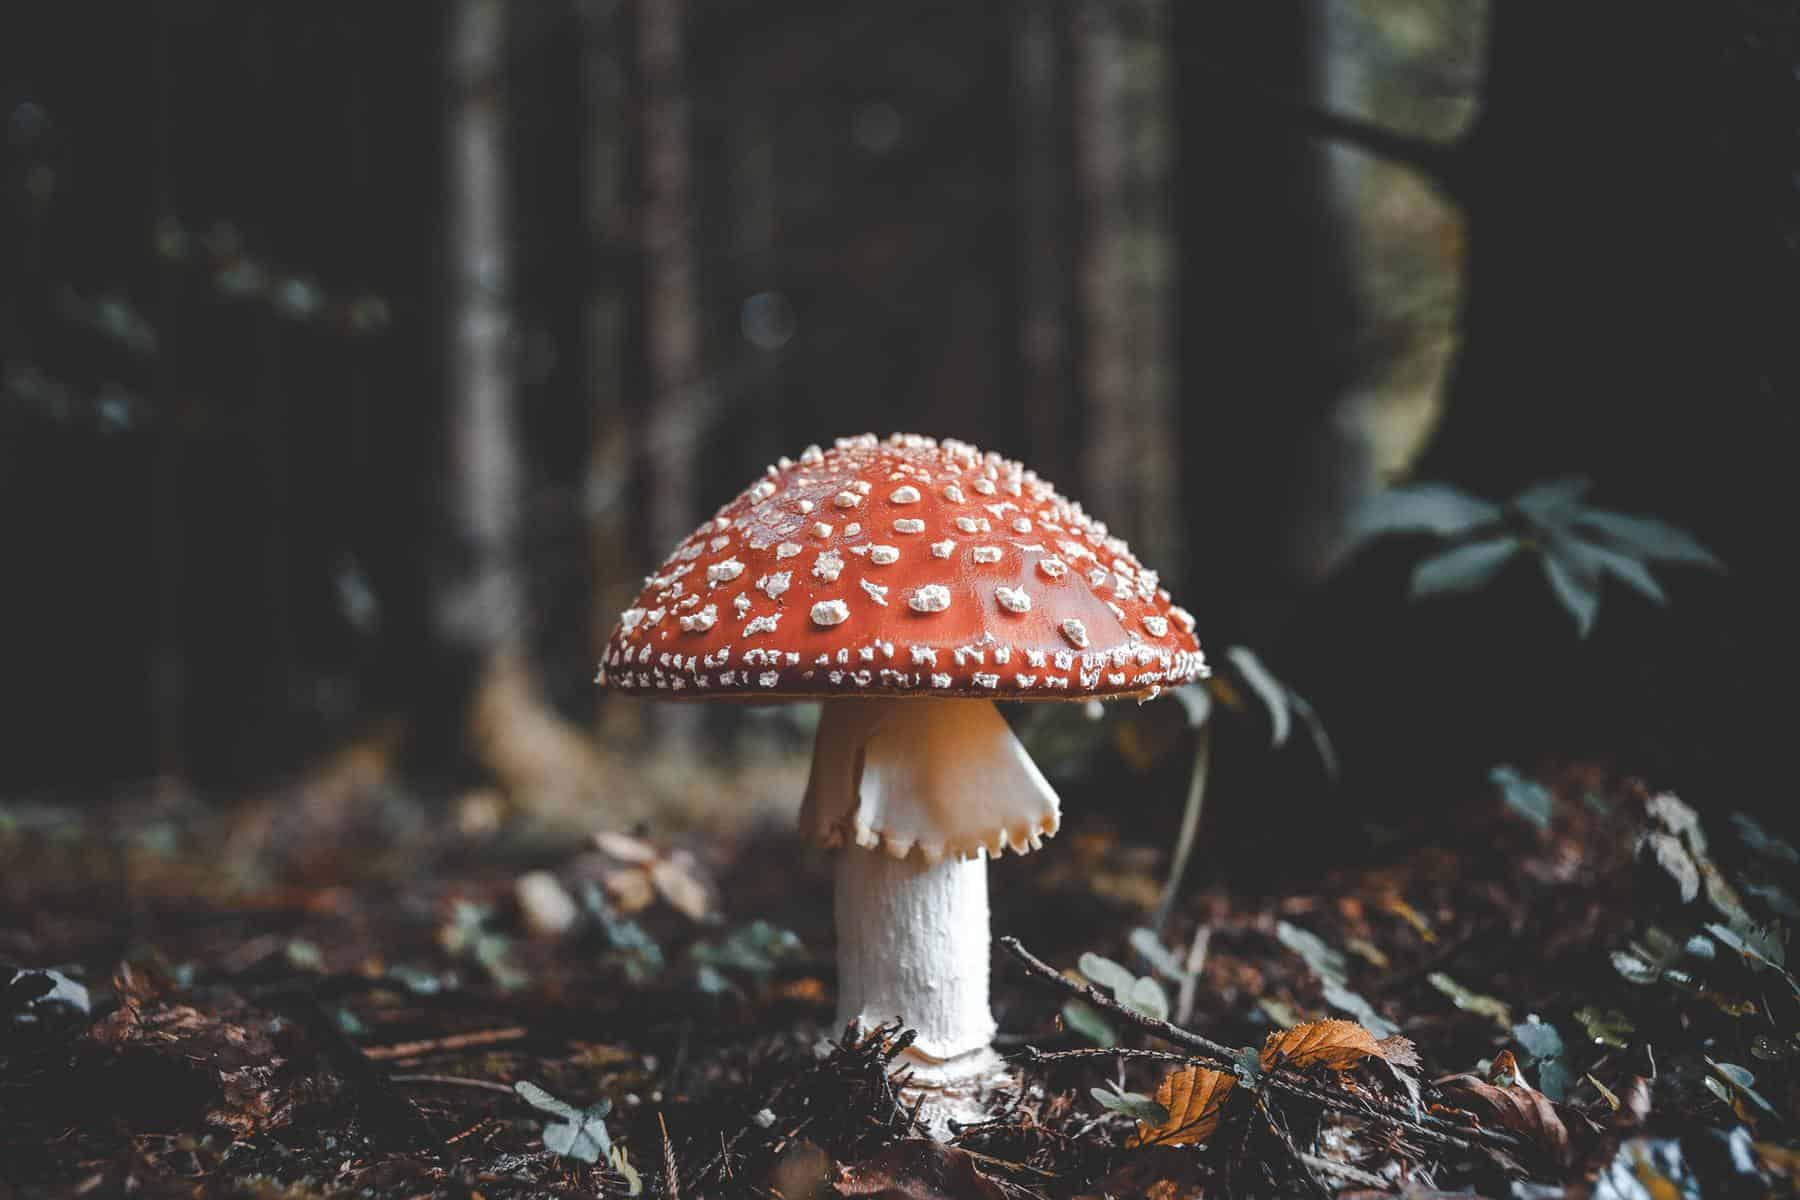 fun facts about Mushrooms